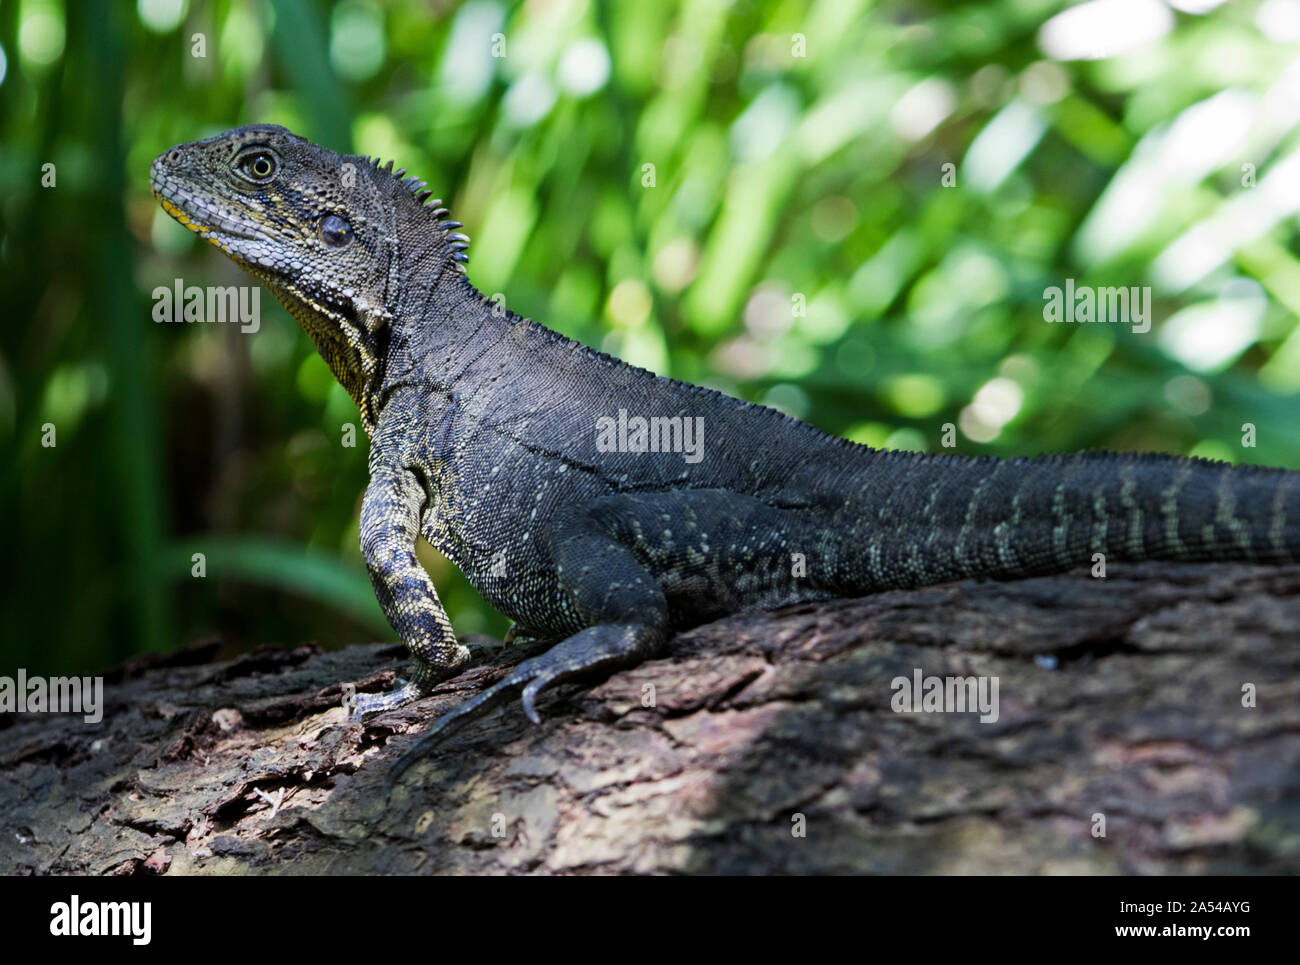 Australian Eastern Water Dragon lizard Itellagama lesueurii with alert expression on log against background of green foliage in city park Stock Photo